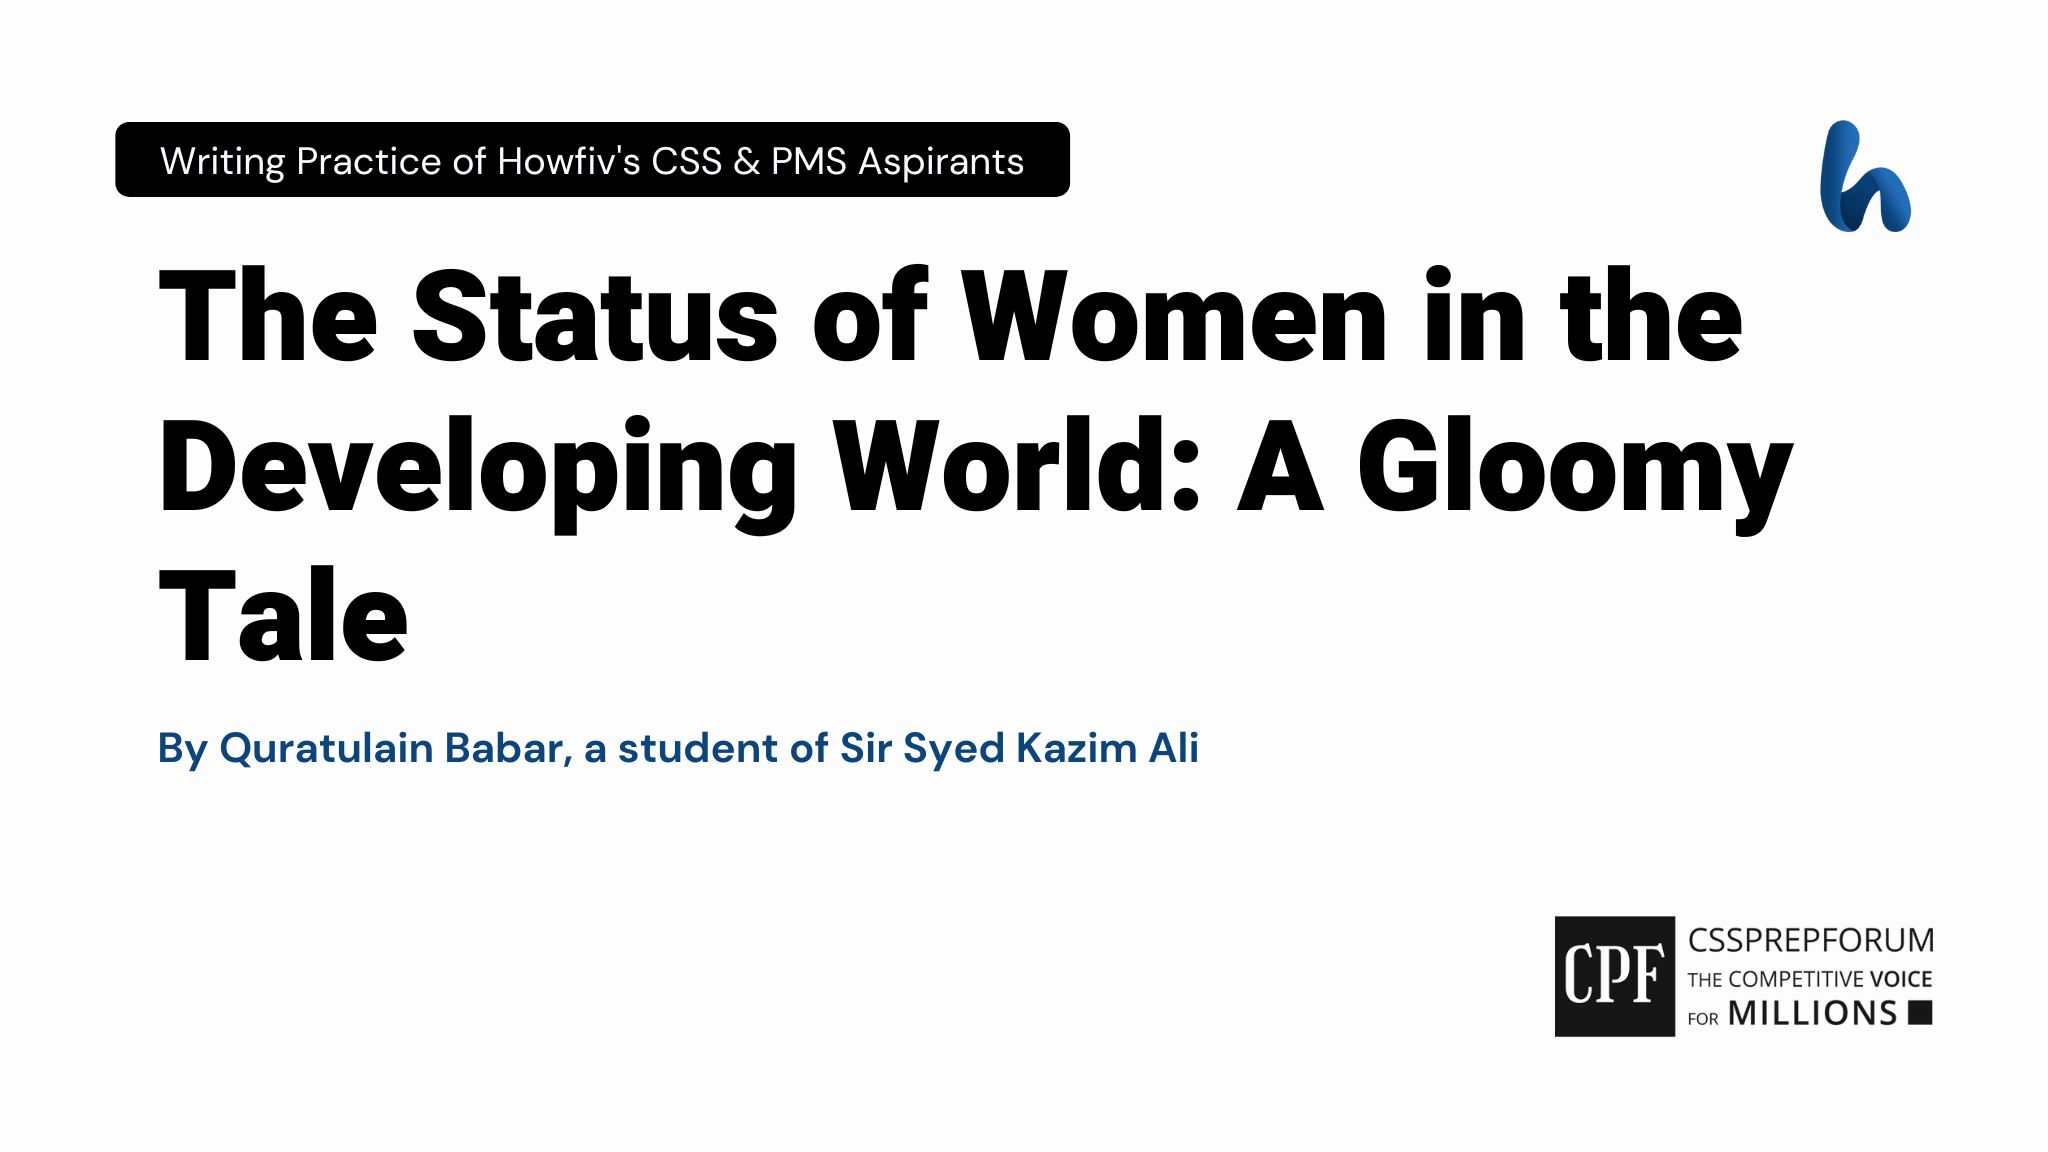 The Status of Women in the Developing World: A Gloomy Tale by Quratulain Babar